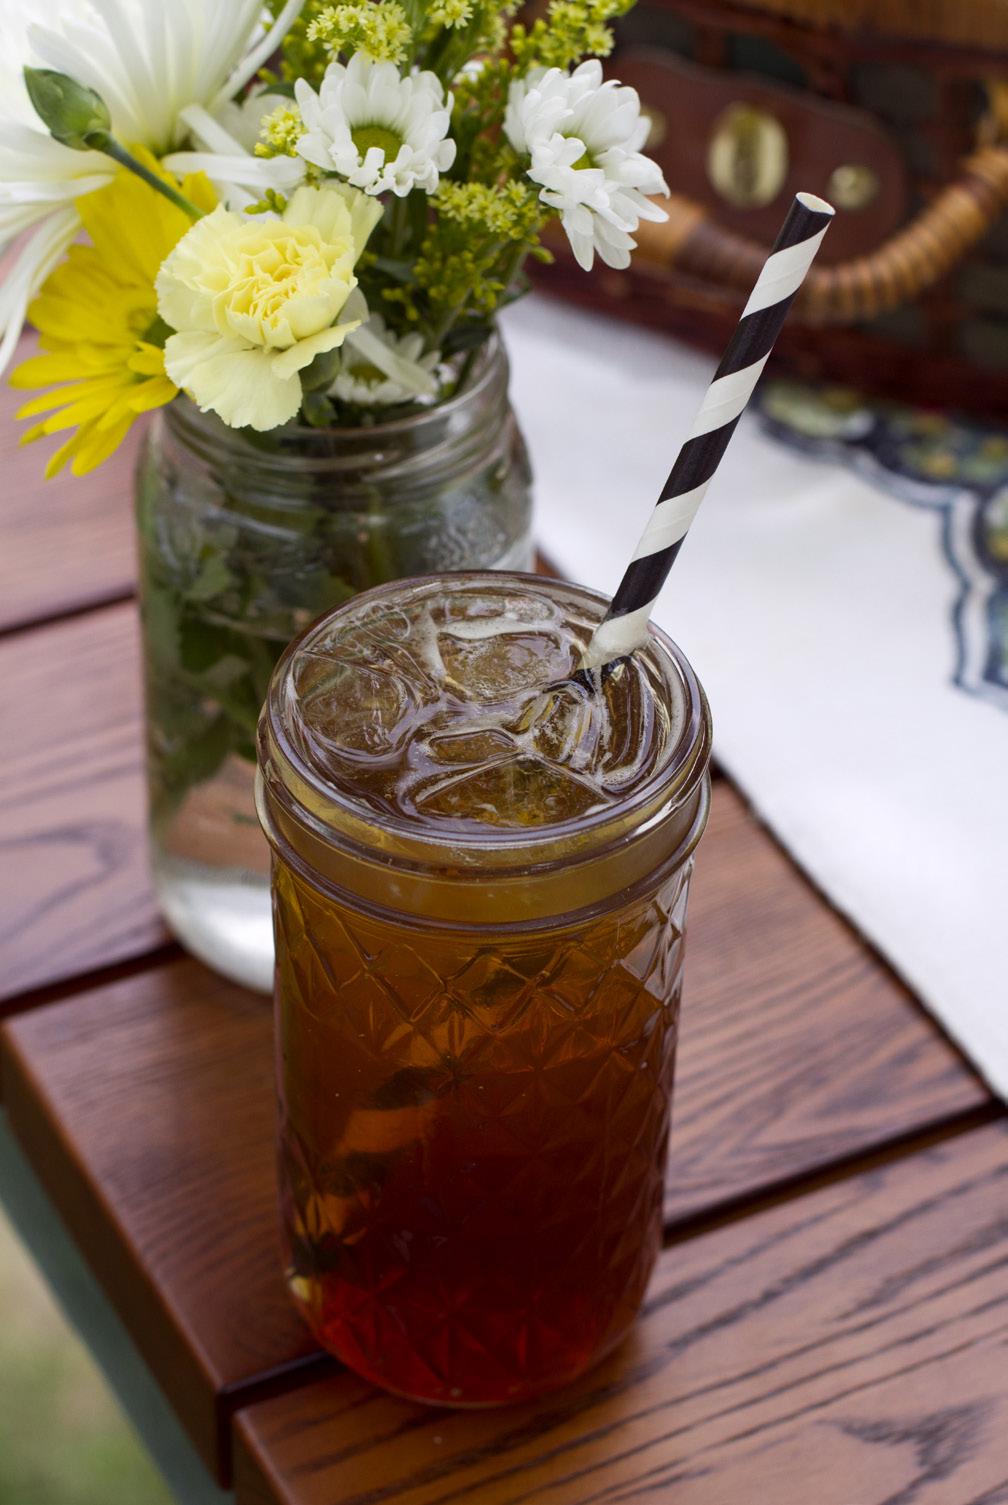 Coconut Cold Brew Tonic A distinctive bite perfectly complements smooth cold brew and sweet island flavors in this sparking coffee.